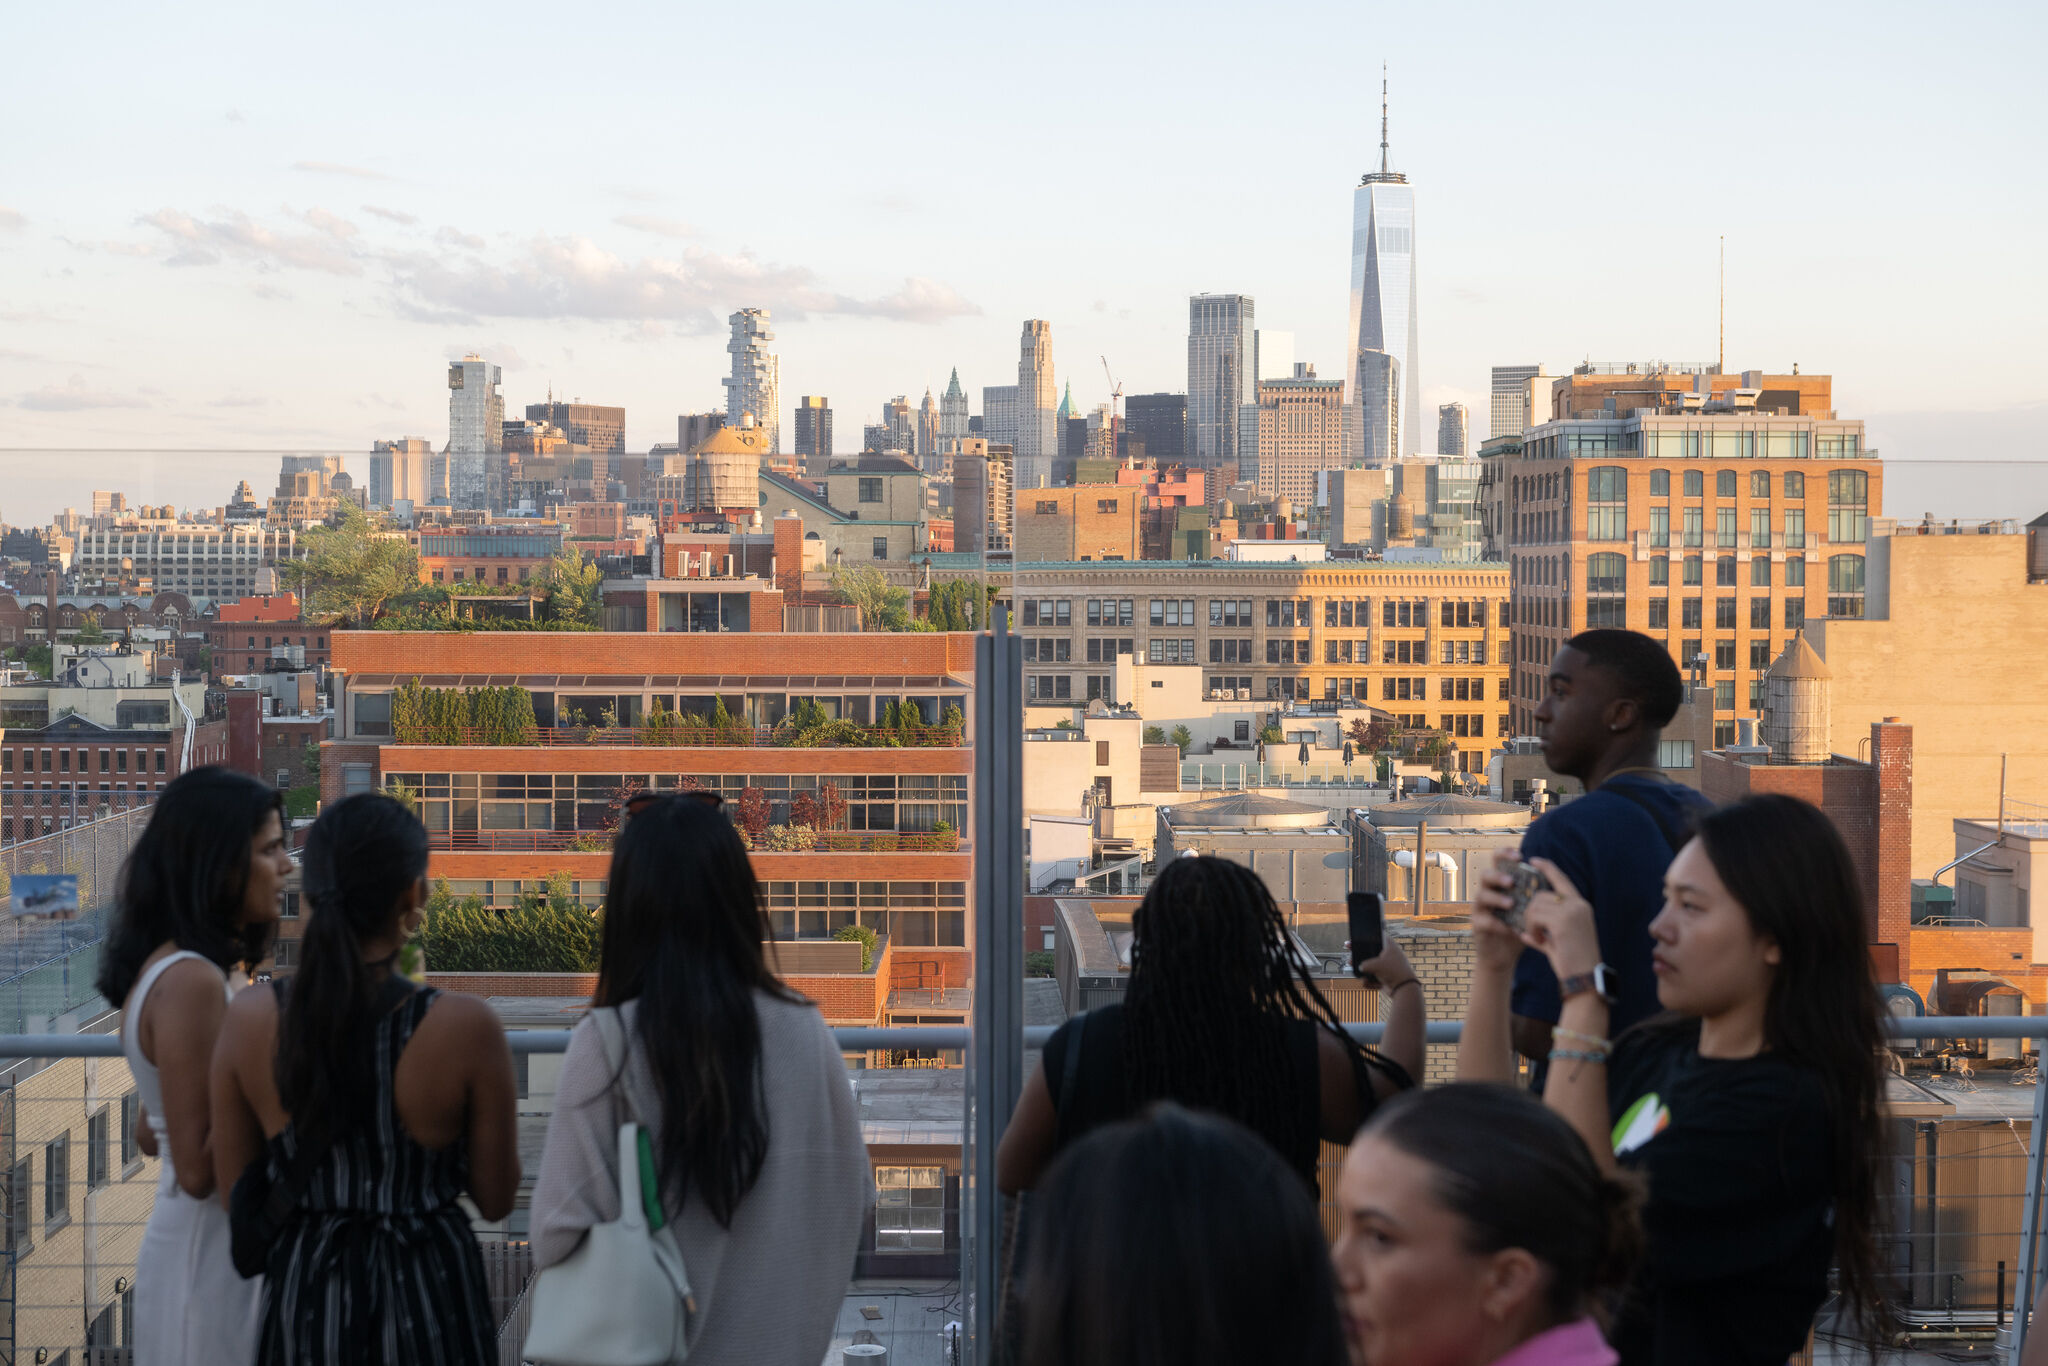 People on a rooftop terrace admire a cityscape with modern and historic buildings, including a tall skyscraper in the background.